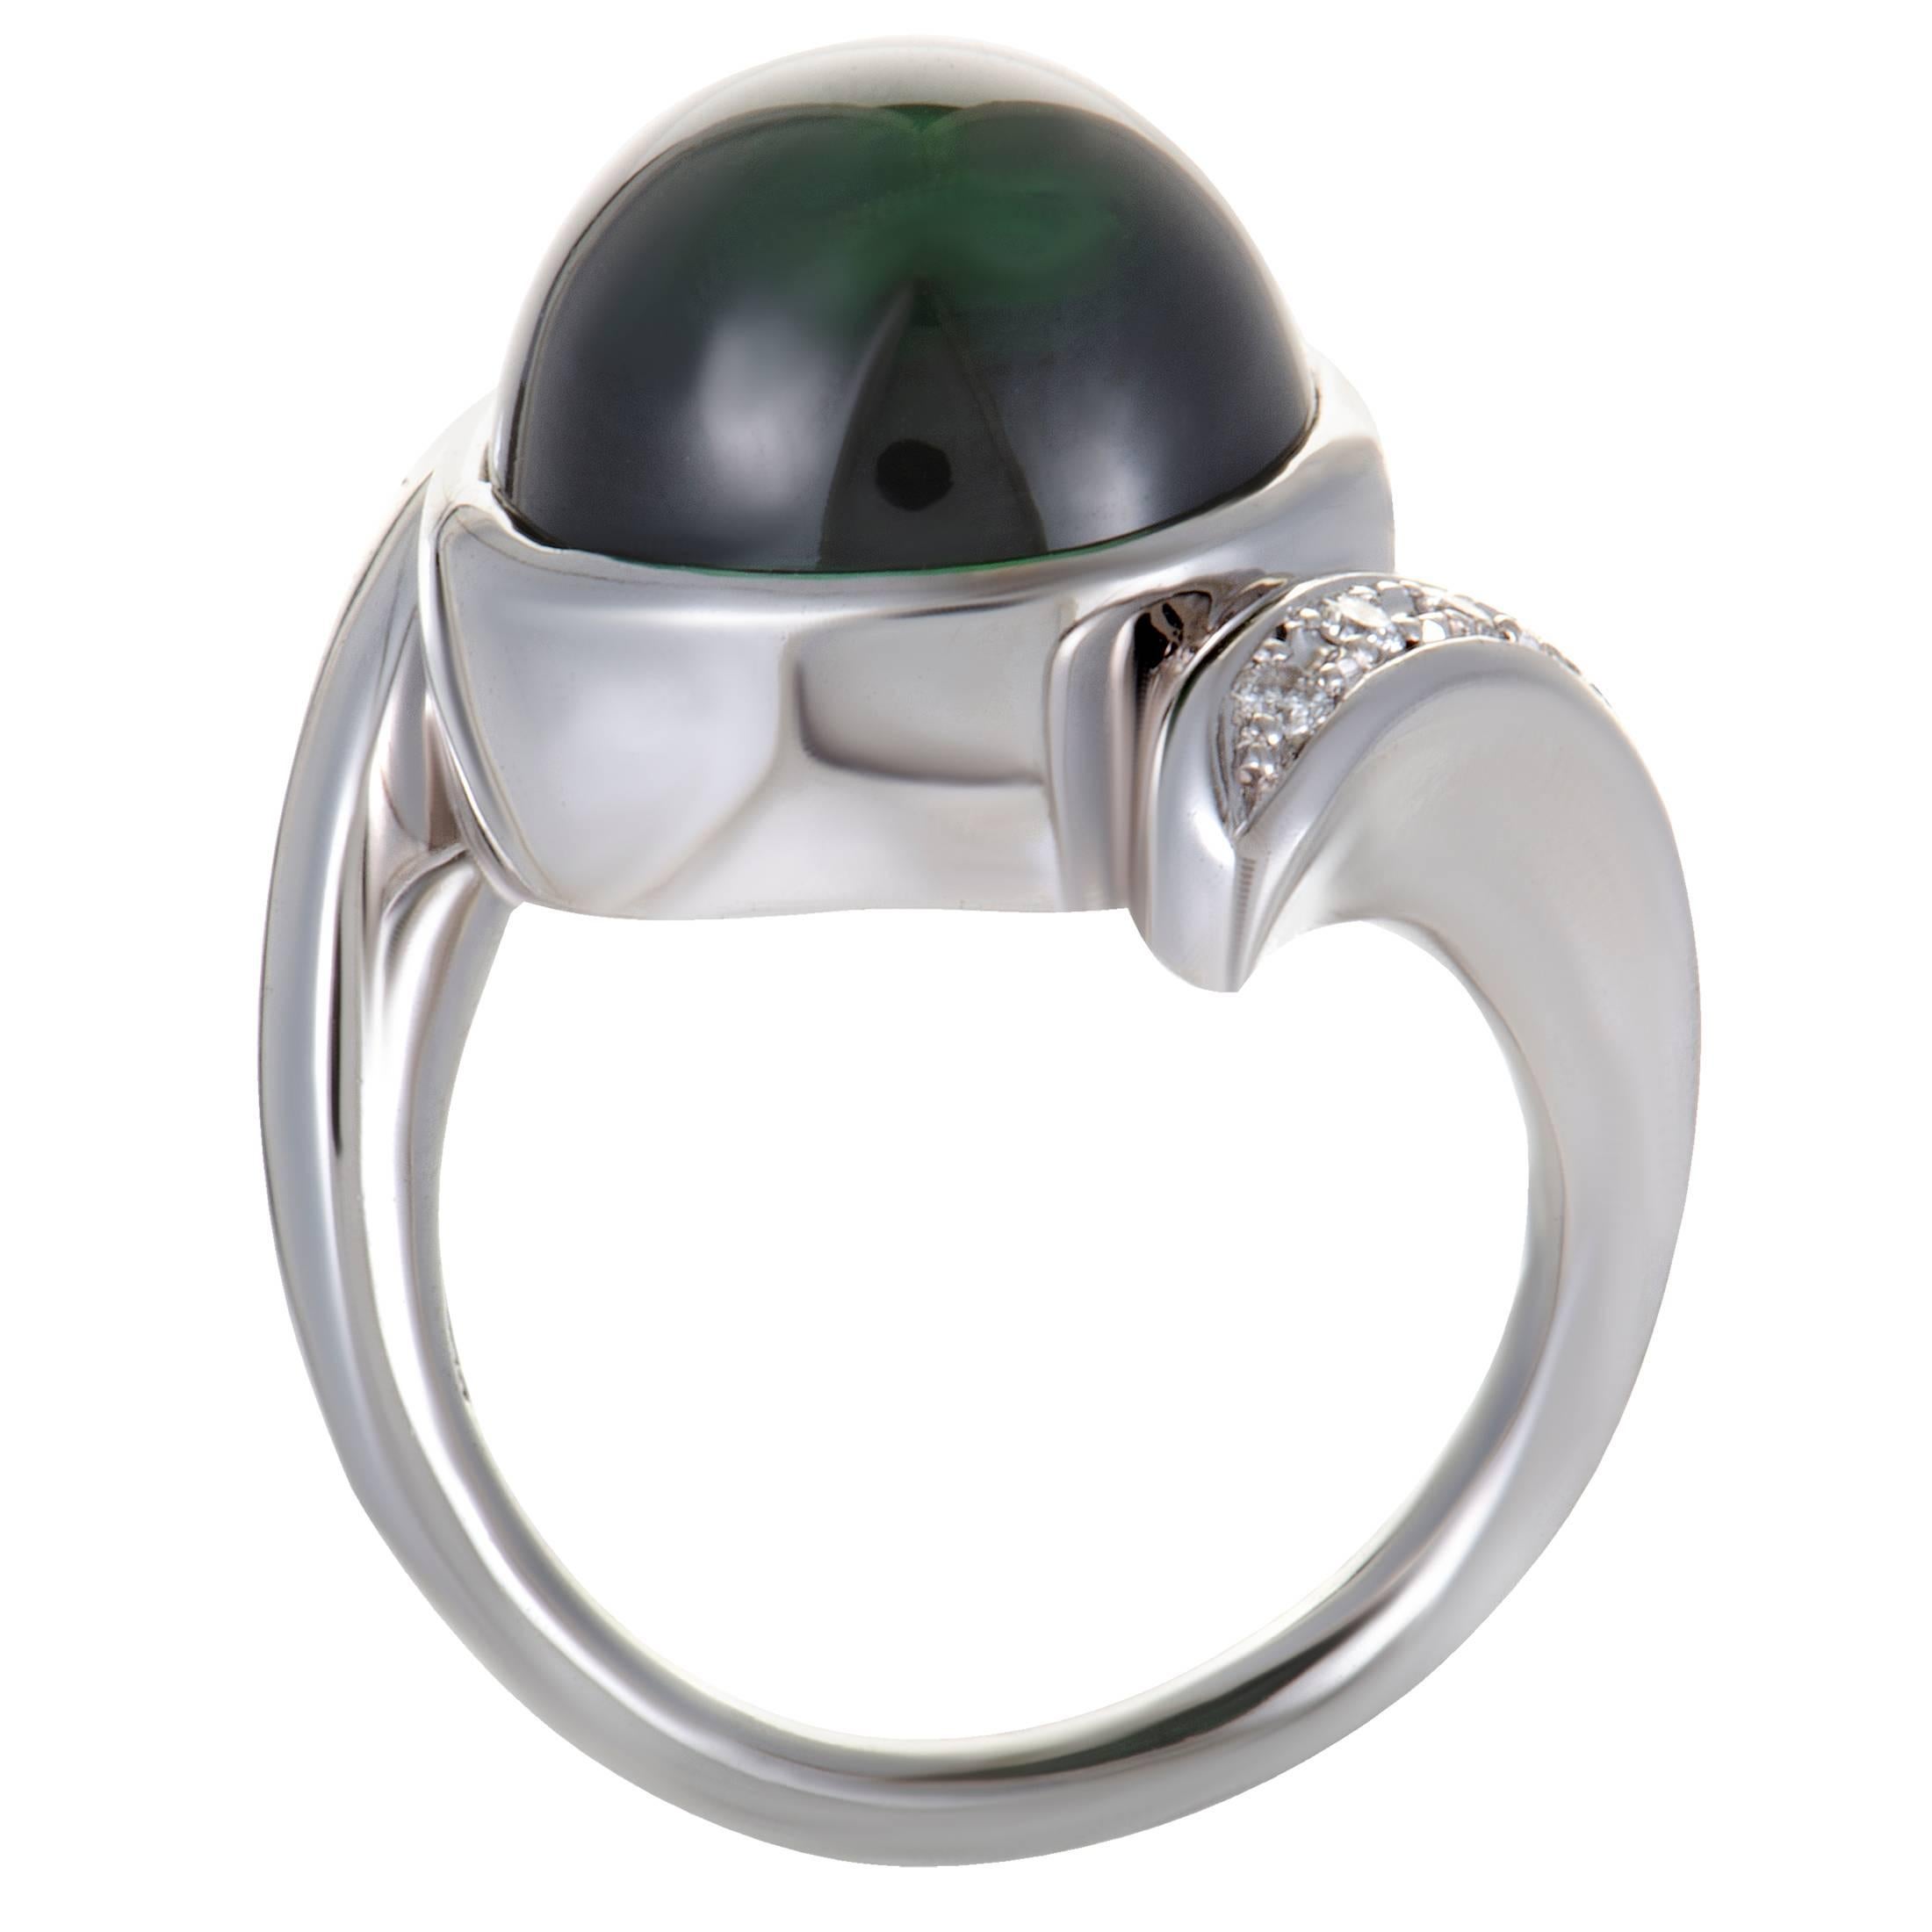 The stunning green tourmaline produces a captivating effect in this exceptional ring made of elegant 18K white gold. The tourmaline weighs 17.68 carats and it is accentuated by 0.10 carats of sparkly diamonds.
Ring Size: 6.25
Ring Top Dimensions: